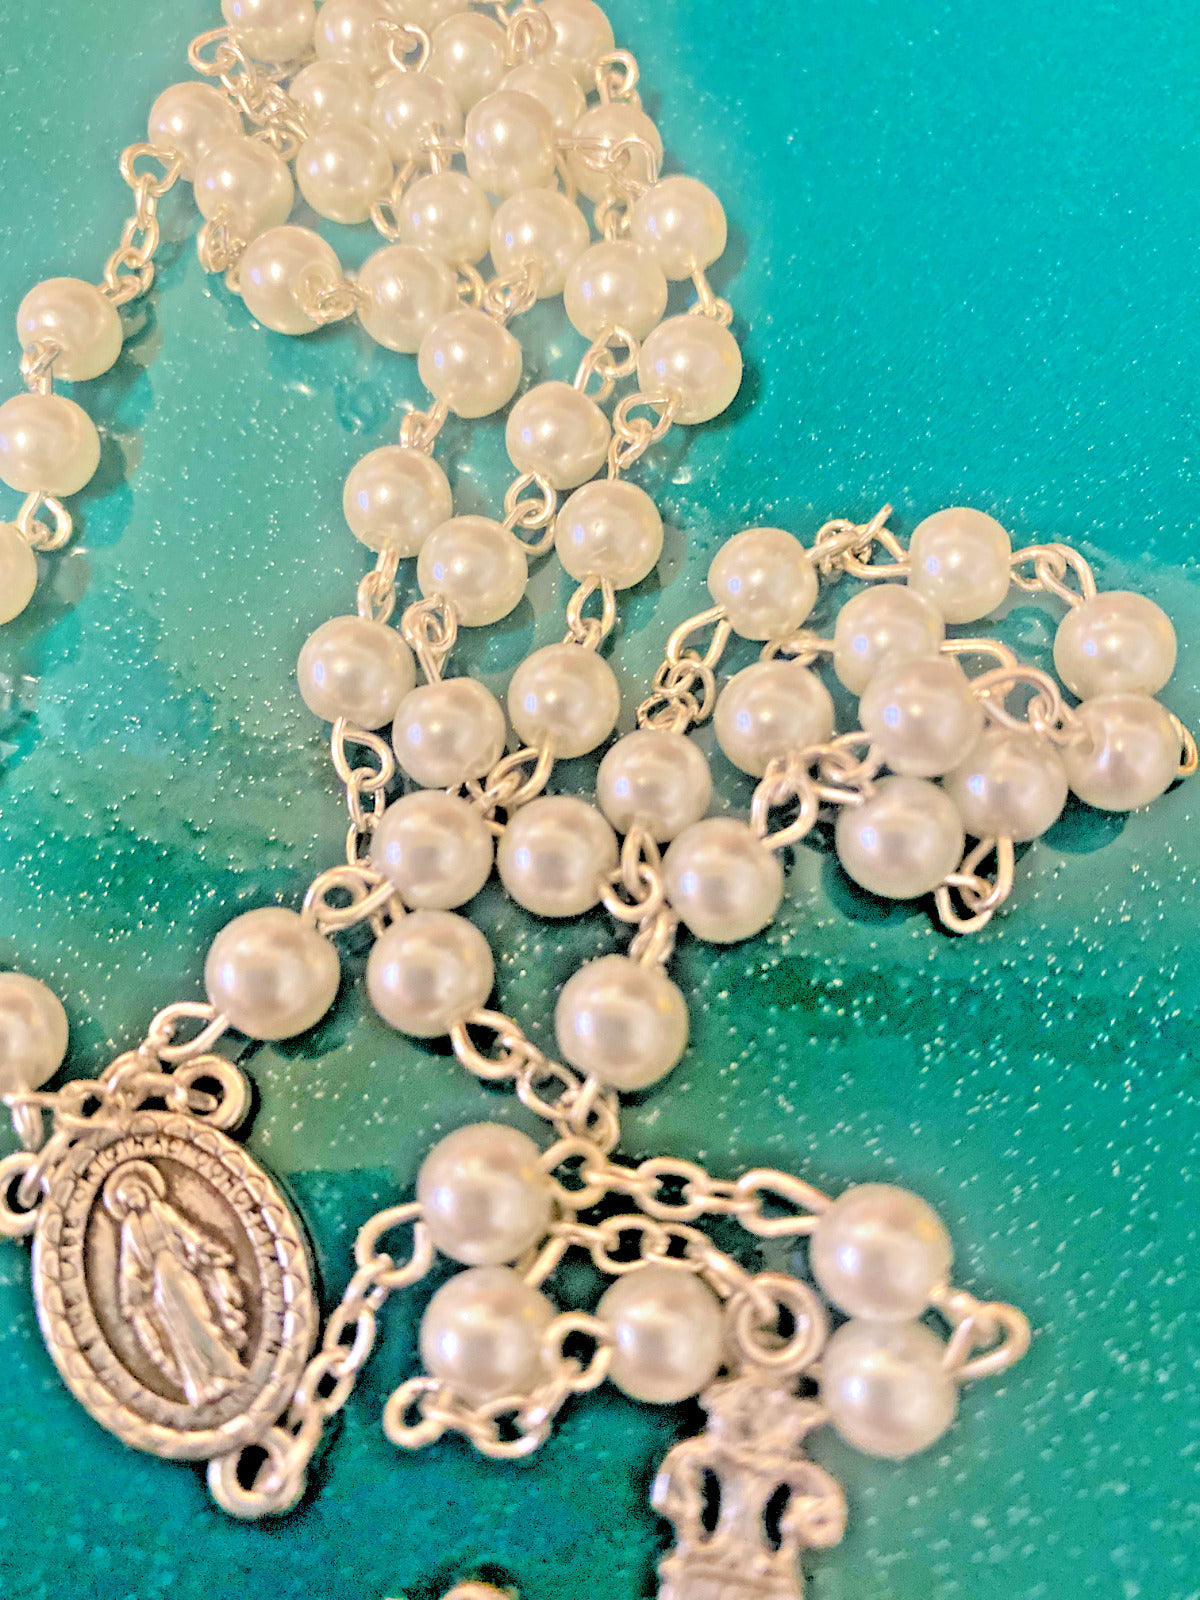 White Faux Pearl Rosary, New # AB-093 - Bob and Penny Lord